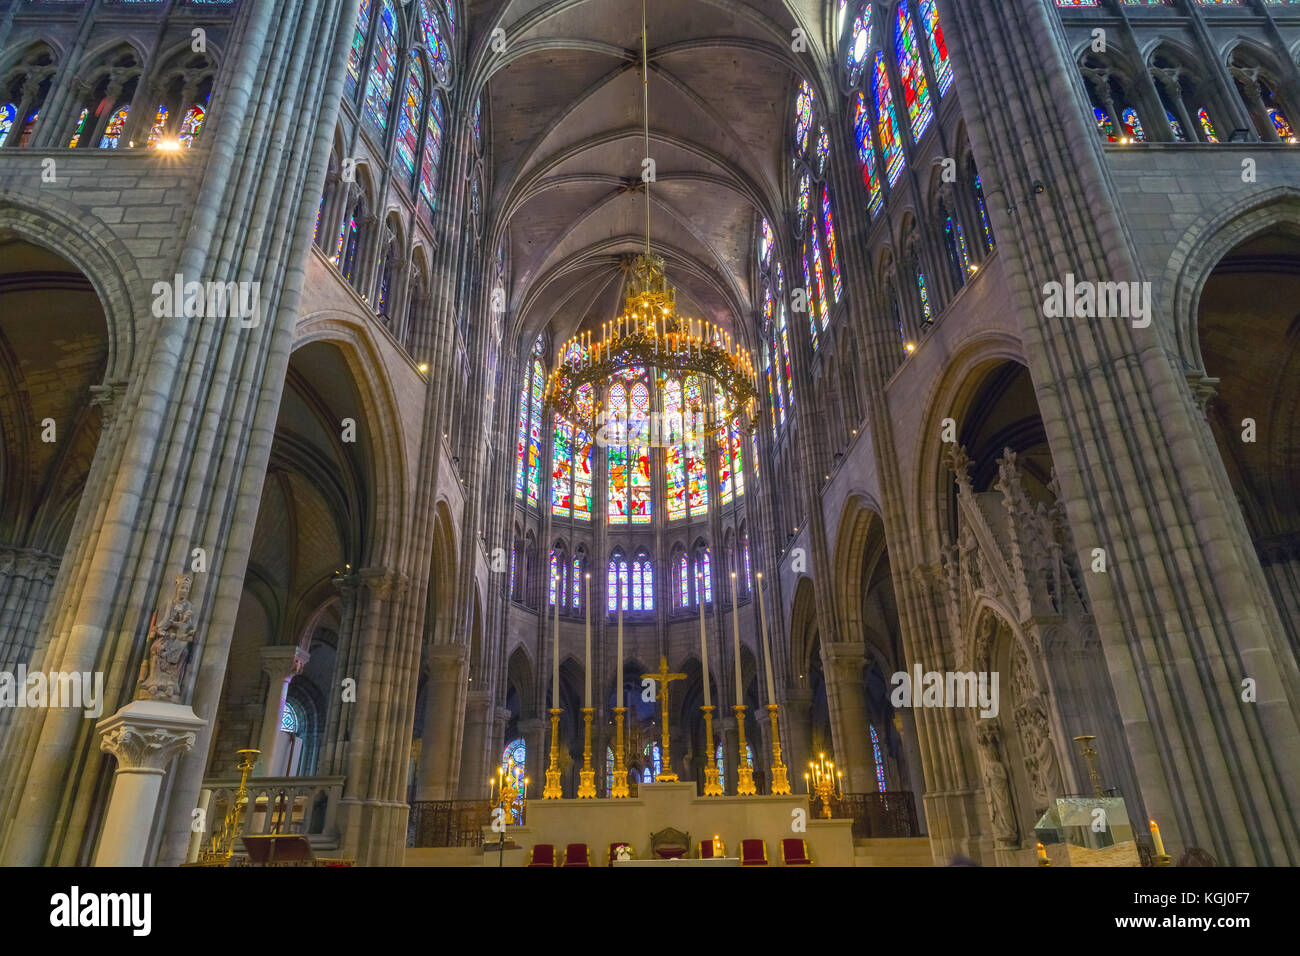 Interior of Saint-Denis Basilica, Paris, France. This is the first structure to have all the elements of Gothic architecture. Stock Photo